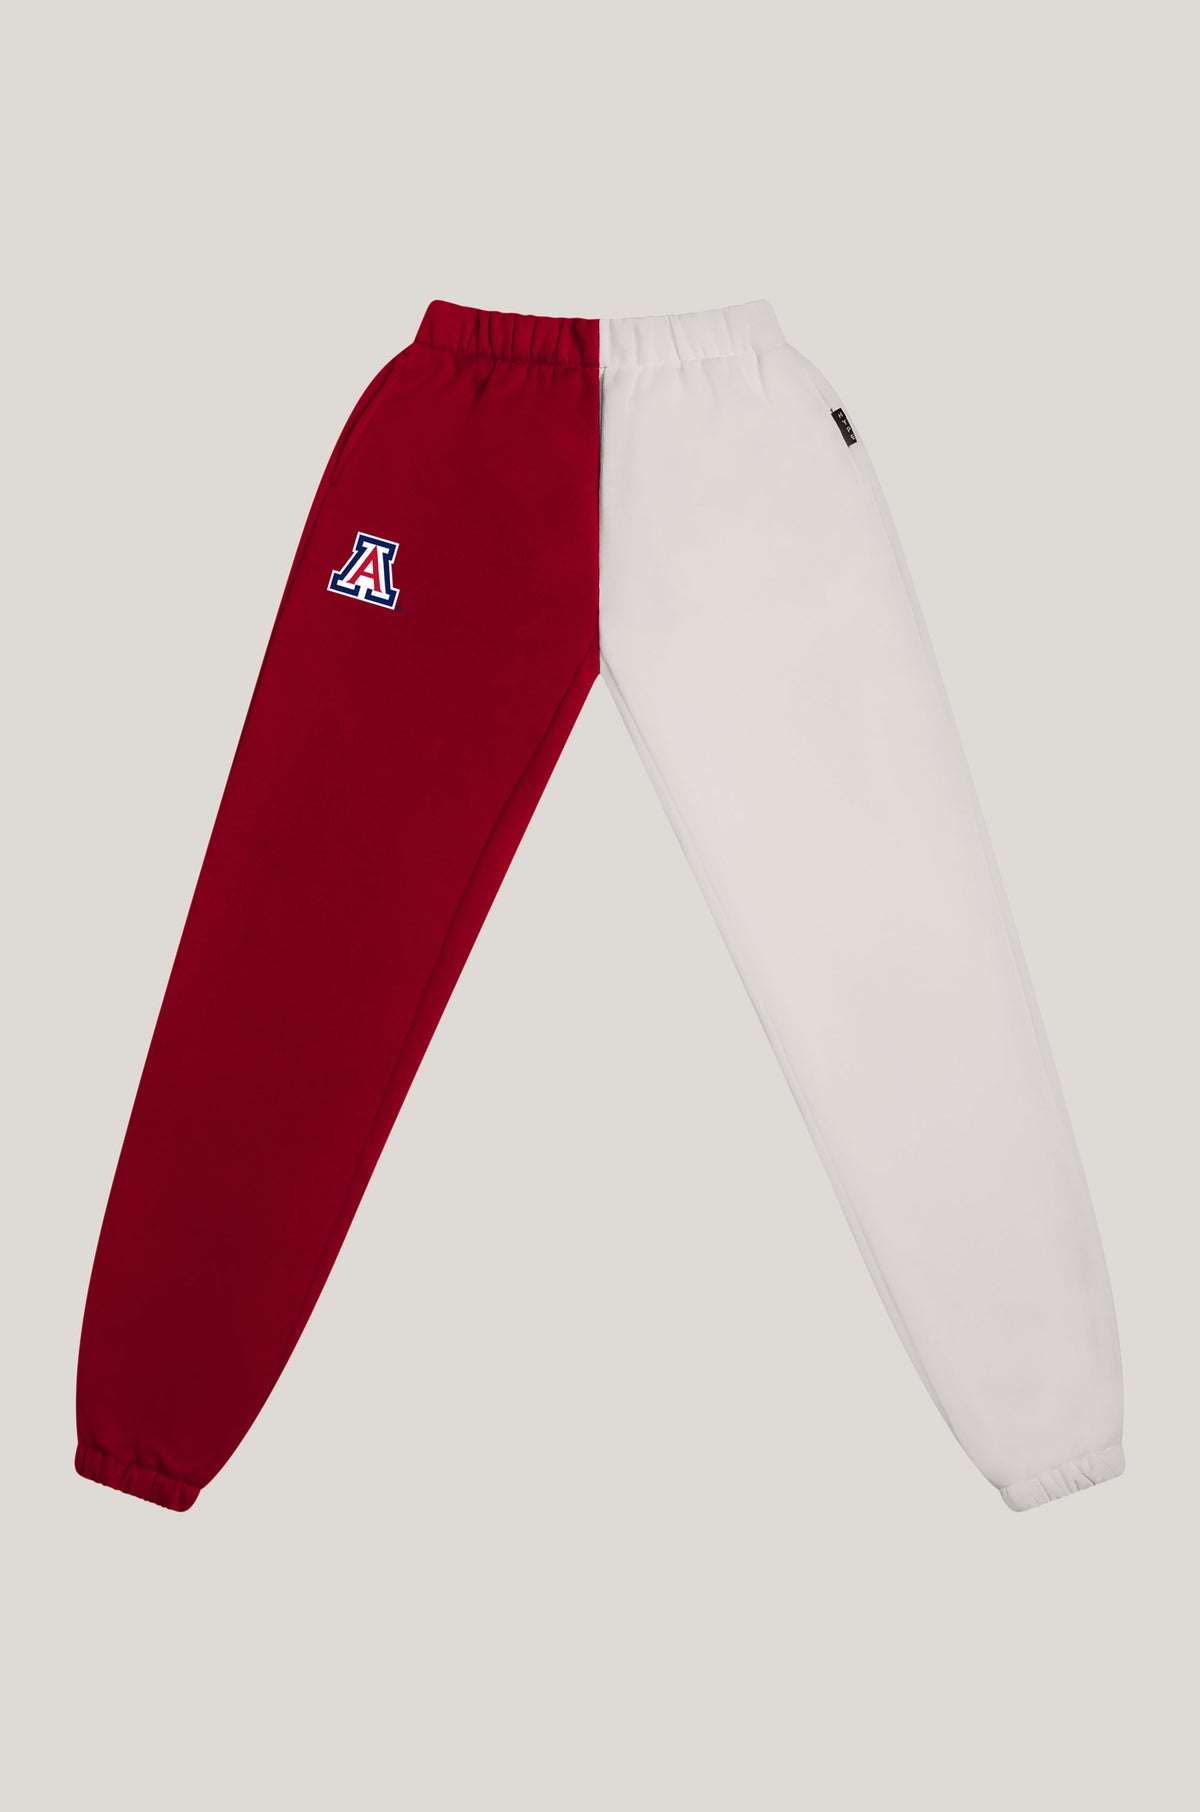 Ow Emb Sweatpants in red  Off-White™ Official FR